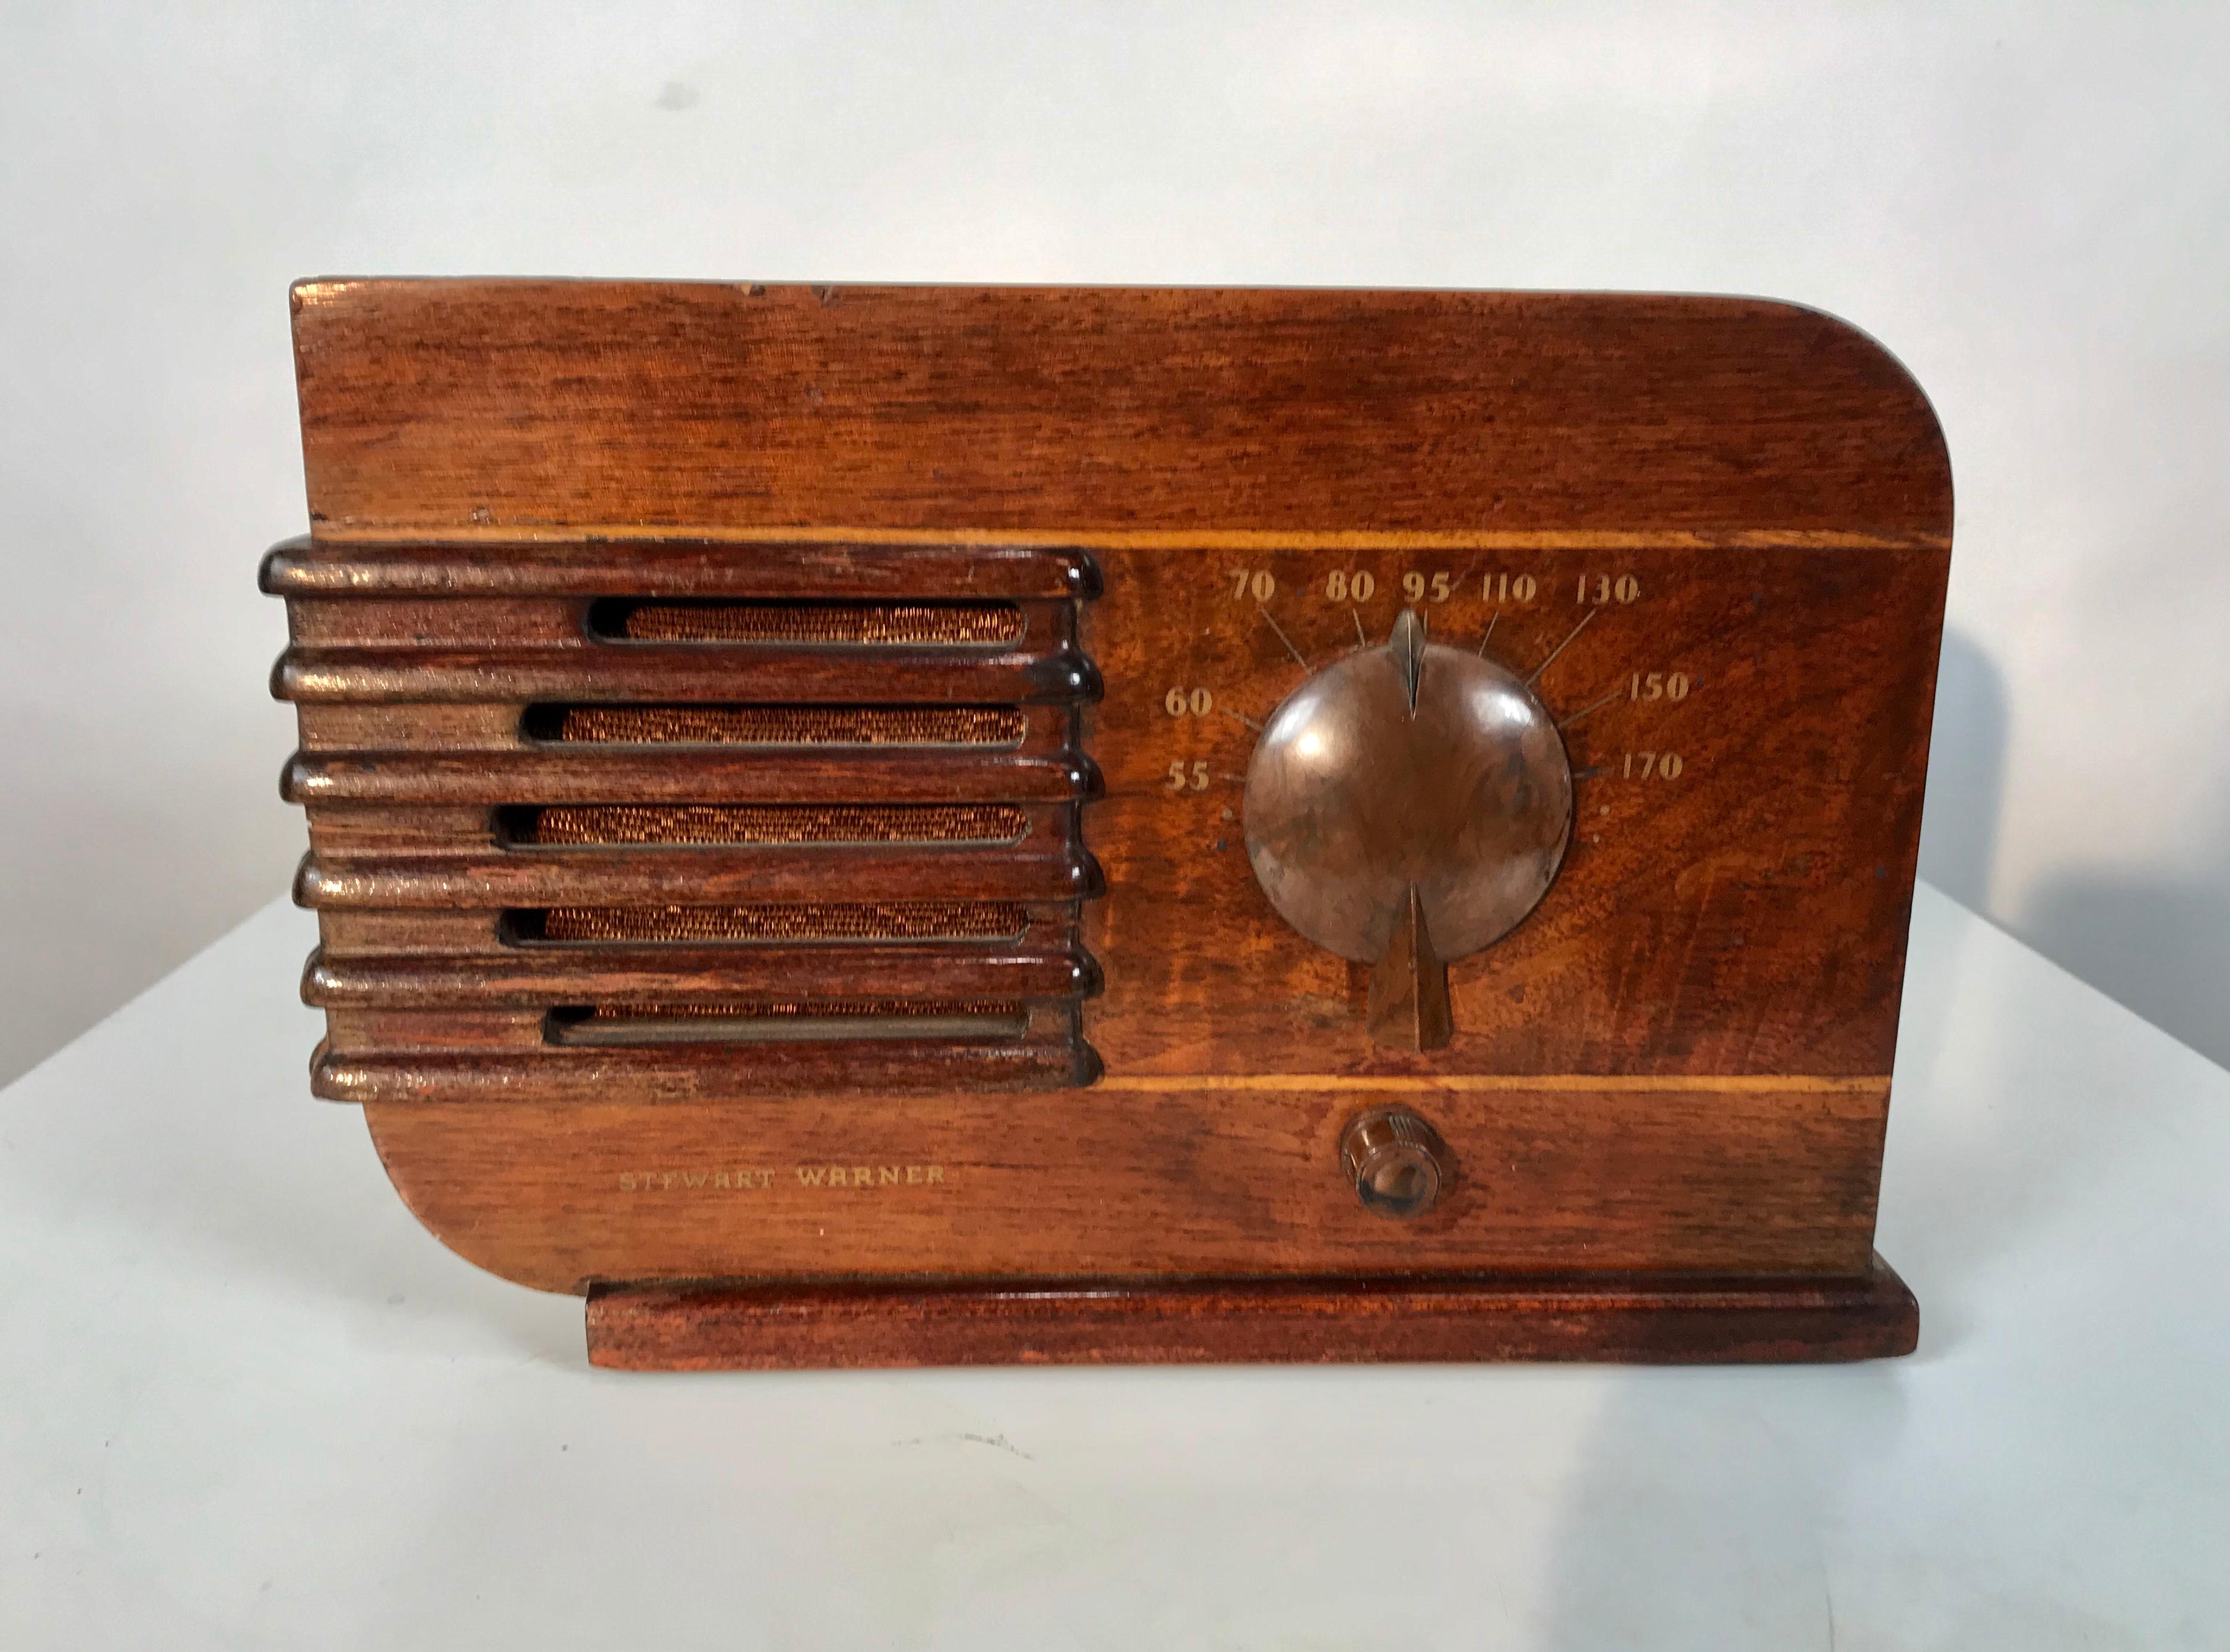 Art Deco streamline tabletop radio by Stewart Warner, Classic 1930s style and design. Bakelite dial tuner and on/off switch, light up station indicator.